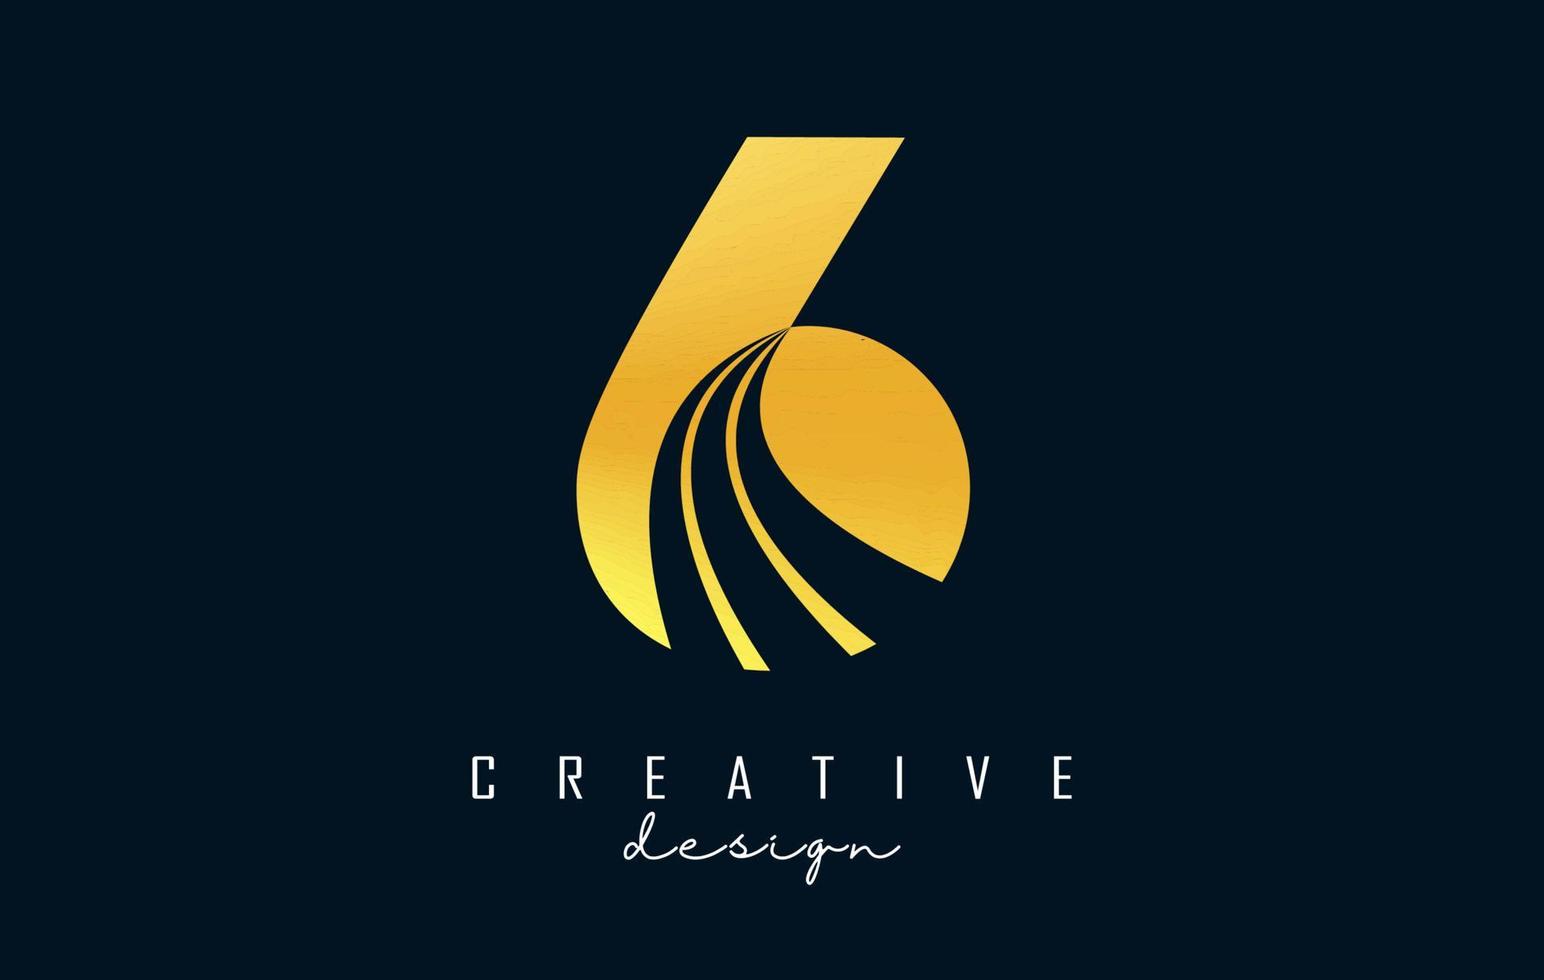 Golden Creative number 6 logo with leading lines and road concept design. Number with geometric design. vector